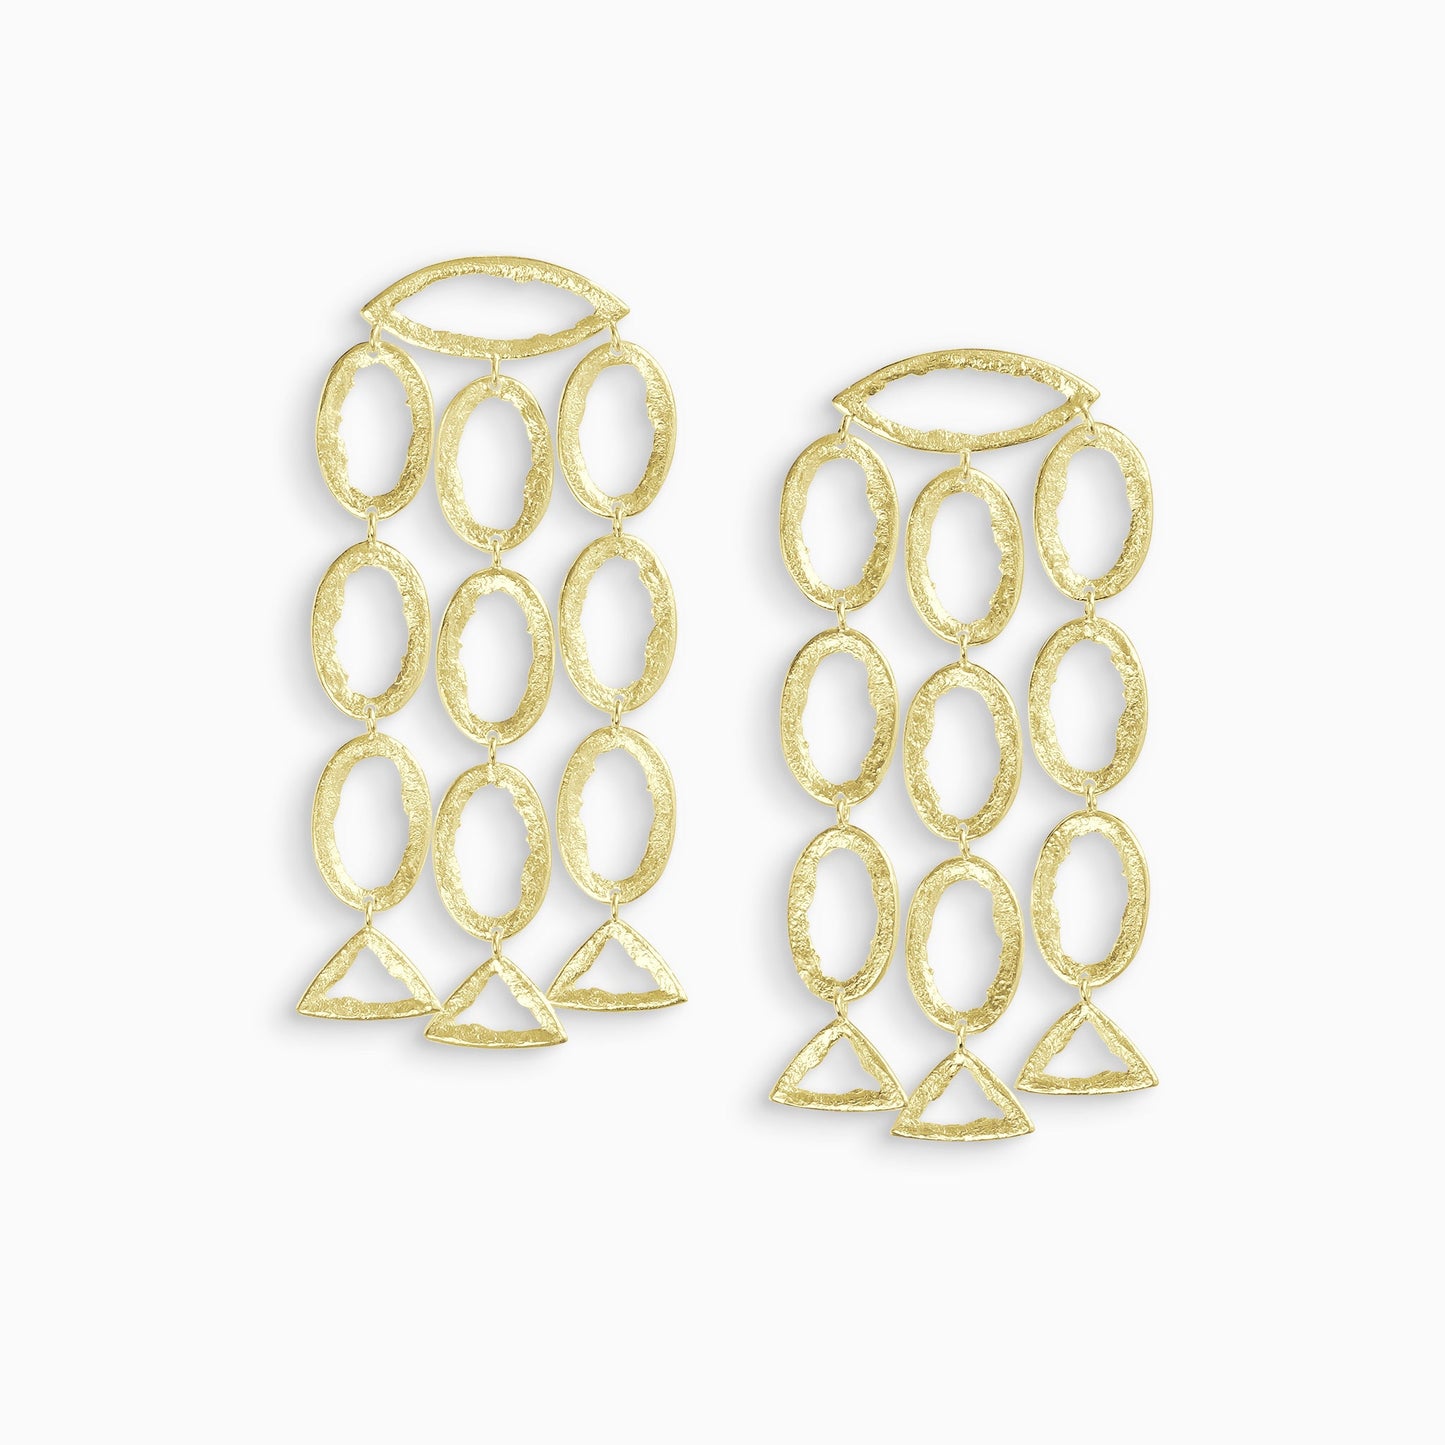 A pair of 18ct Fairtrade yellow gold drop earrings. 3 parallel lines of articulating oval shapes hang from a horizontal lozenge shape with a stud ear fastening. These open shapes have a strong organic texture and are smooth on the outside edges with fragmented inside edges. 76mm length. 40mm width.